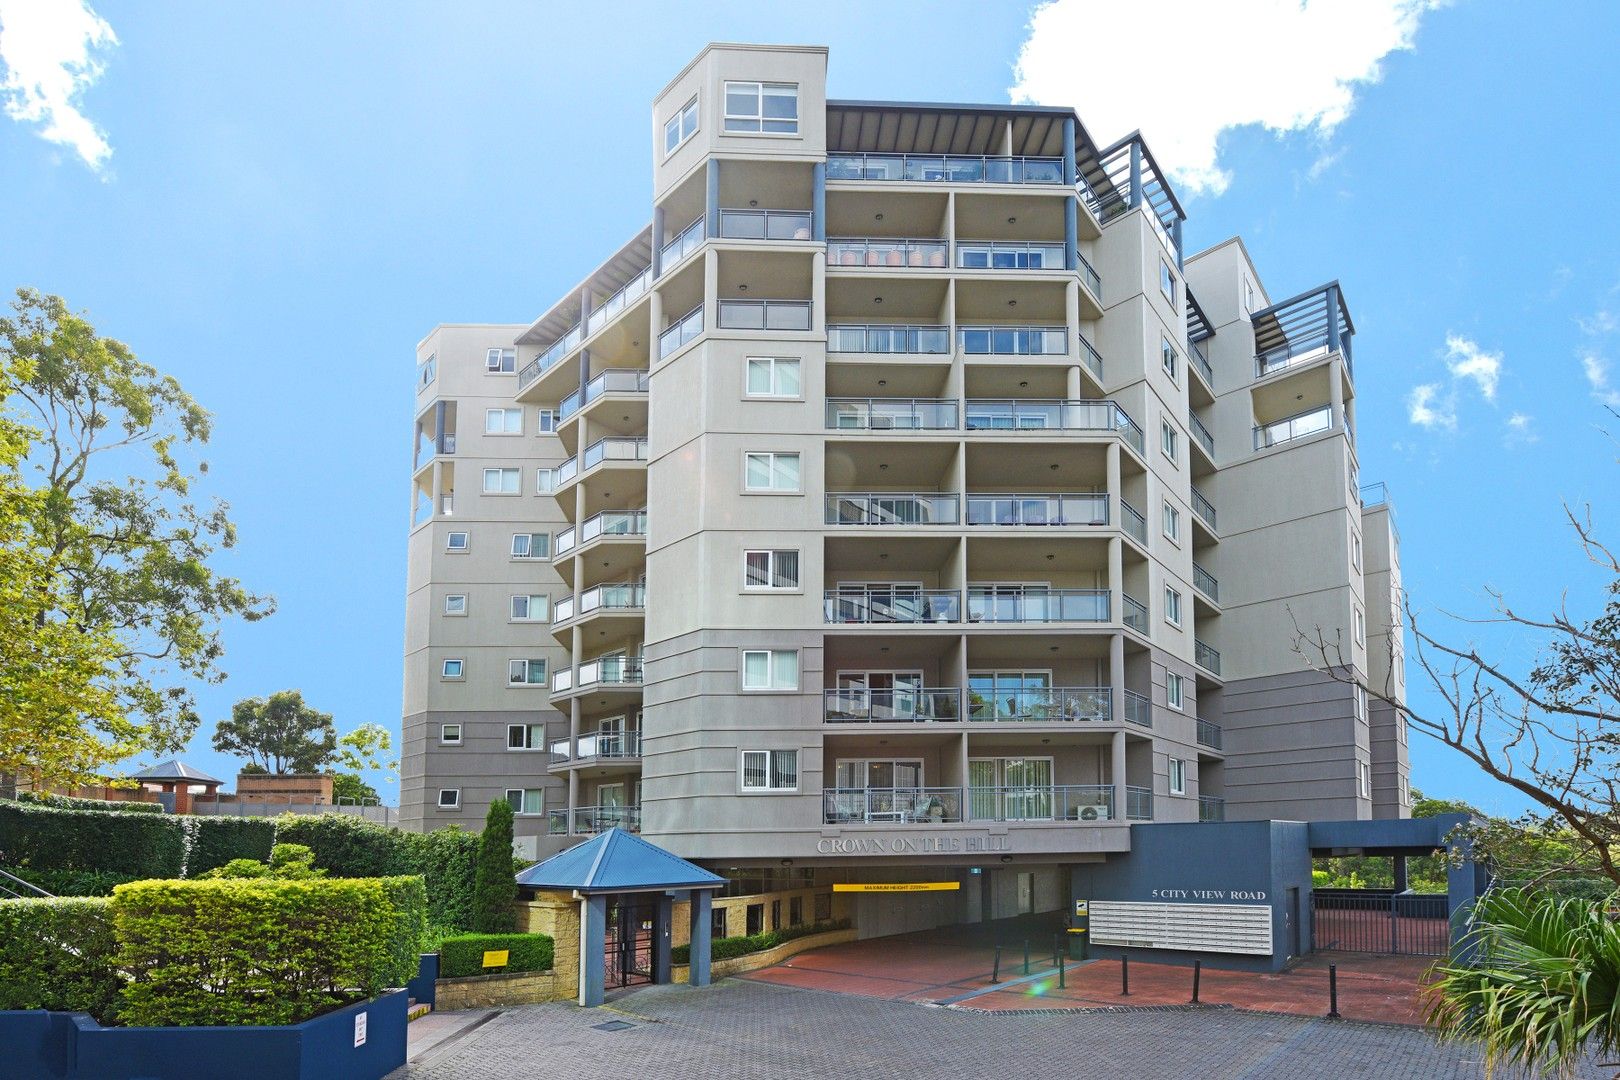 803/5 City View Road, Pennant Hills NSW 2120, Image 0